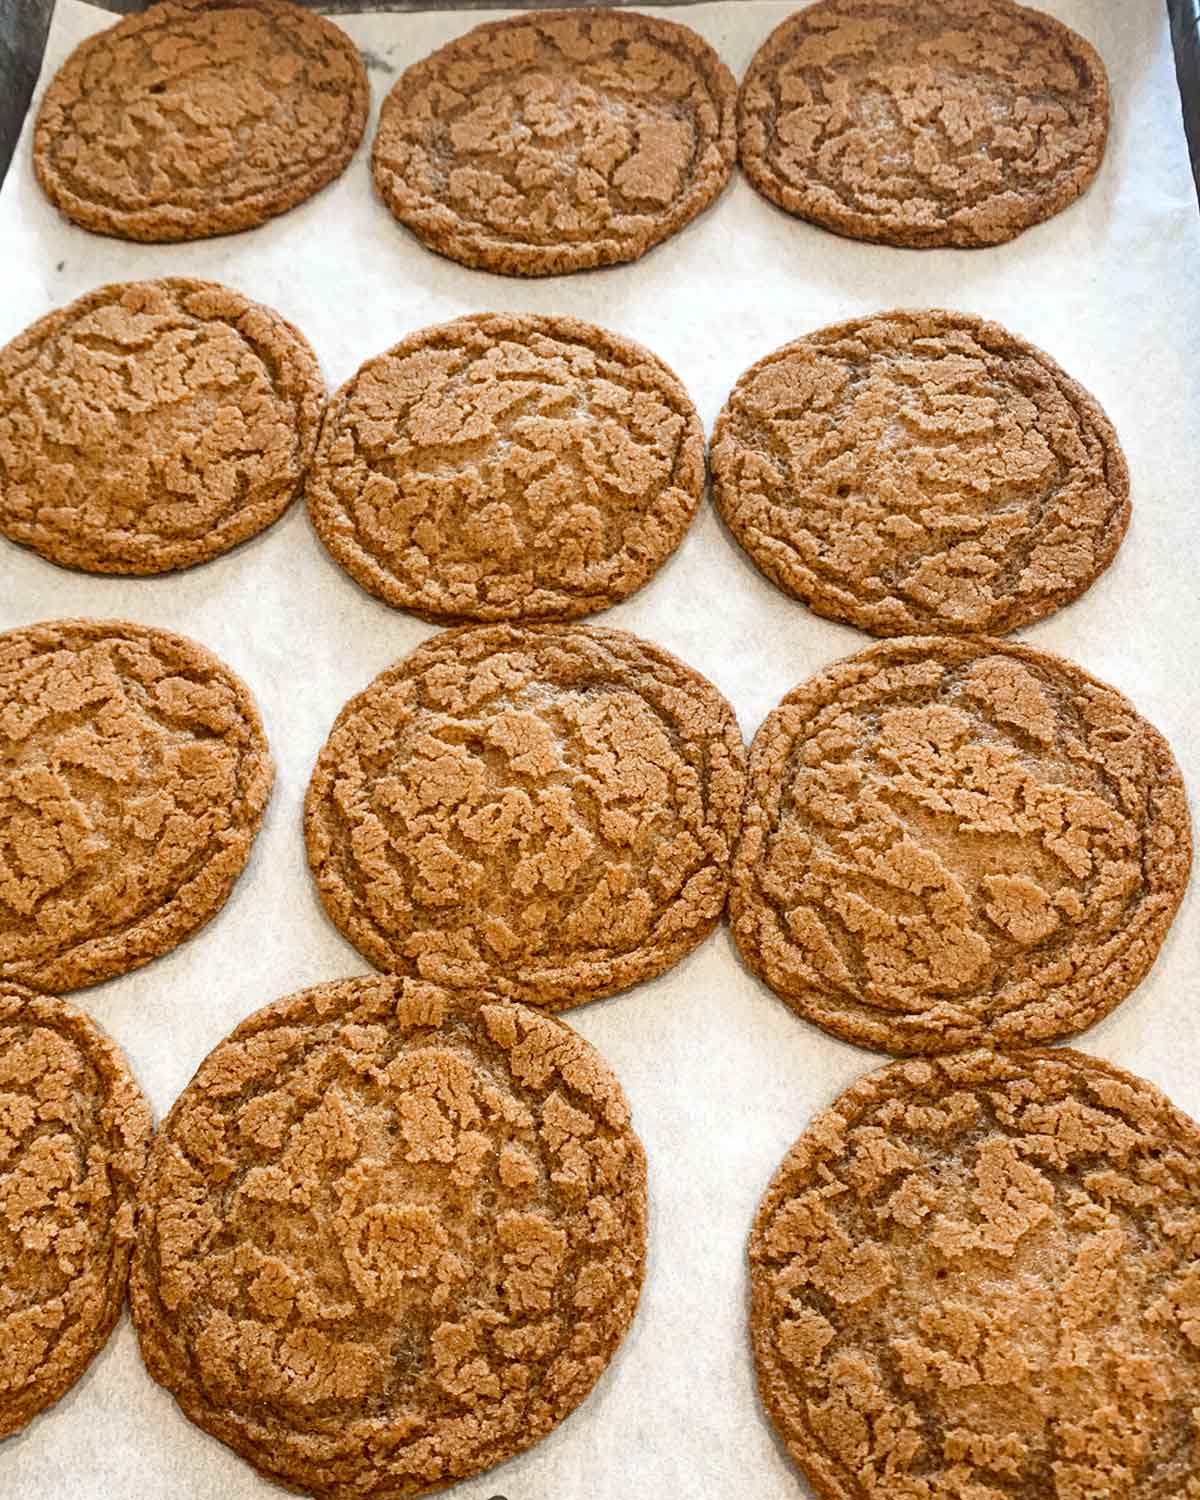 Twelve chewy molasses cookies on a baking sheet.